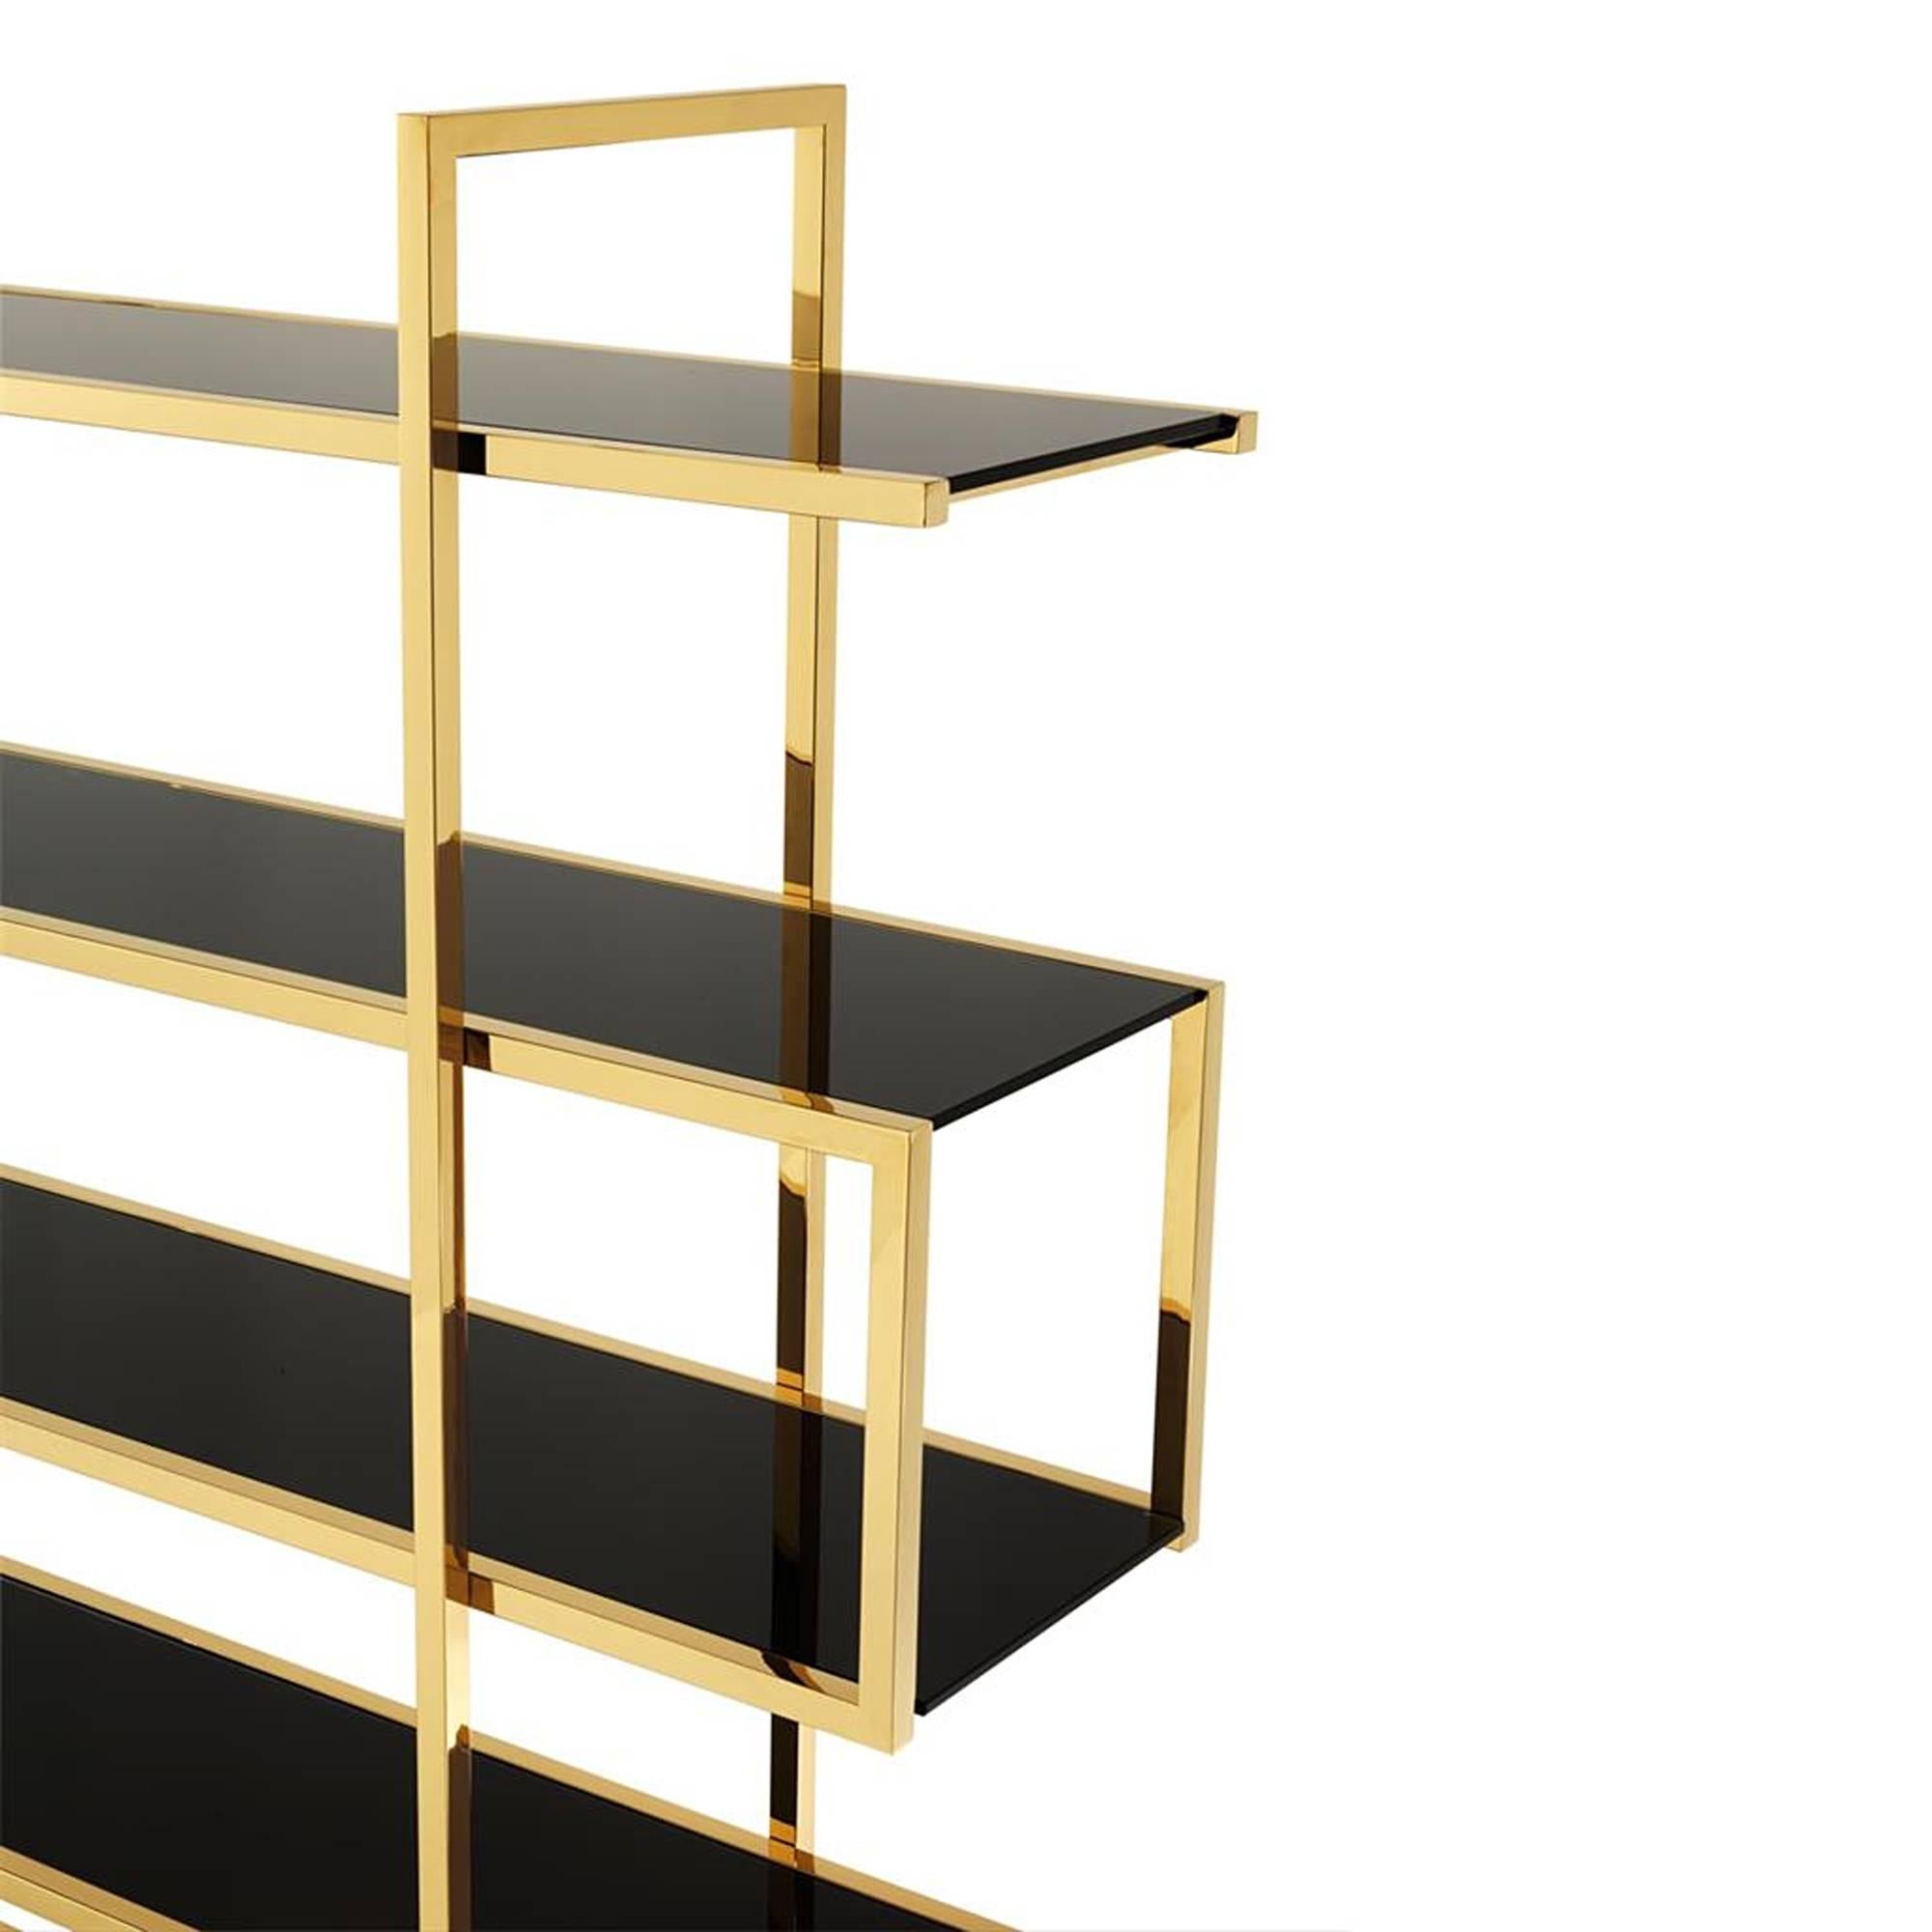 Bookshelves gold with gold finish structure
and smoke glass. Available in polished stainless
steel. Elegant piece.
